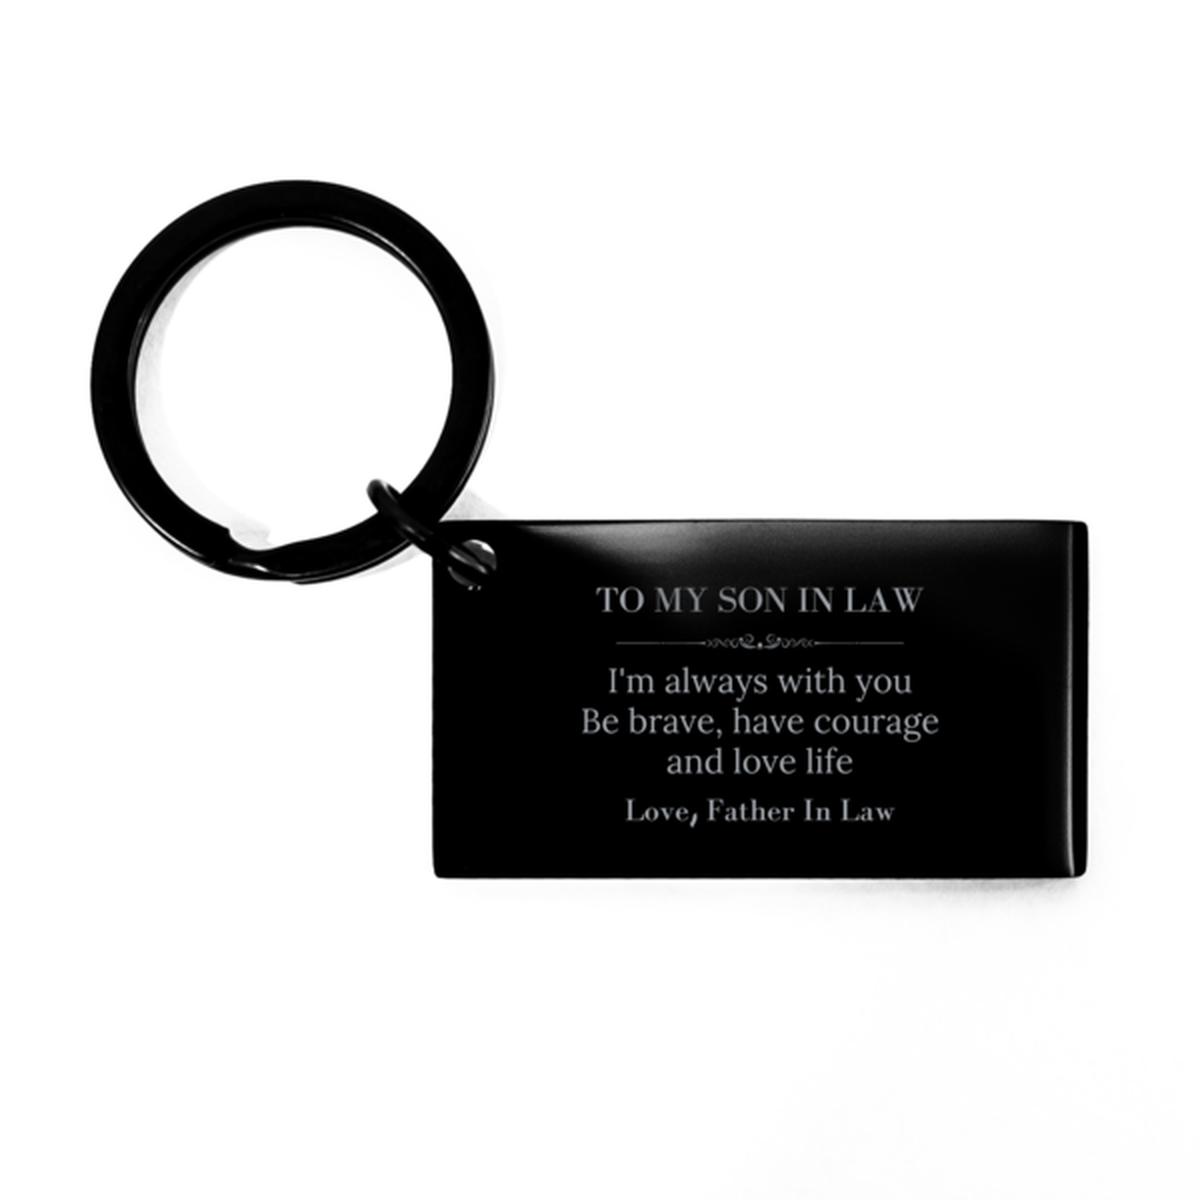 To My Son In Law Gifts from Father In Law, Unique Keychain Inspirational Christmas Birthday Graduation Gifts for Son In Law I'm always with you. Be brave, have courage and love life. Love, Father In Law